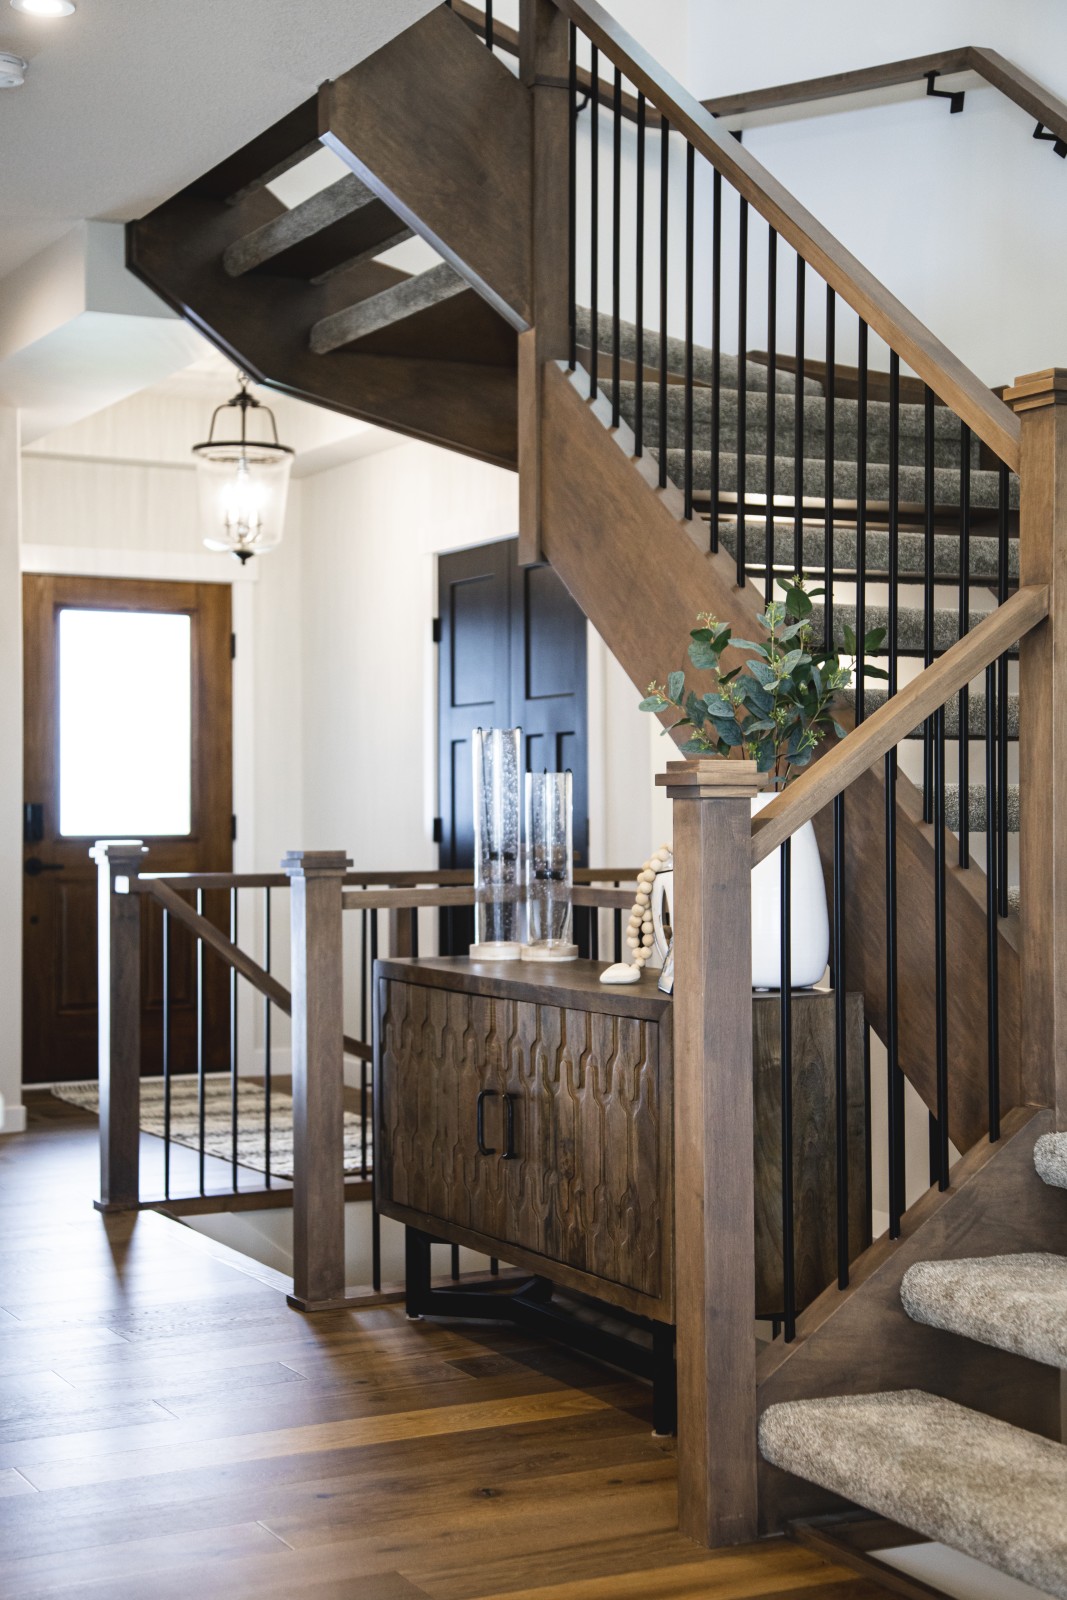 Stained wood staircase with black spindles and open treads. The front door behind the staircase and sideboard in the nook of the staircase are in complementing warm wood tones